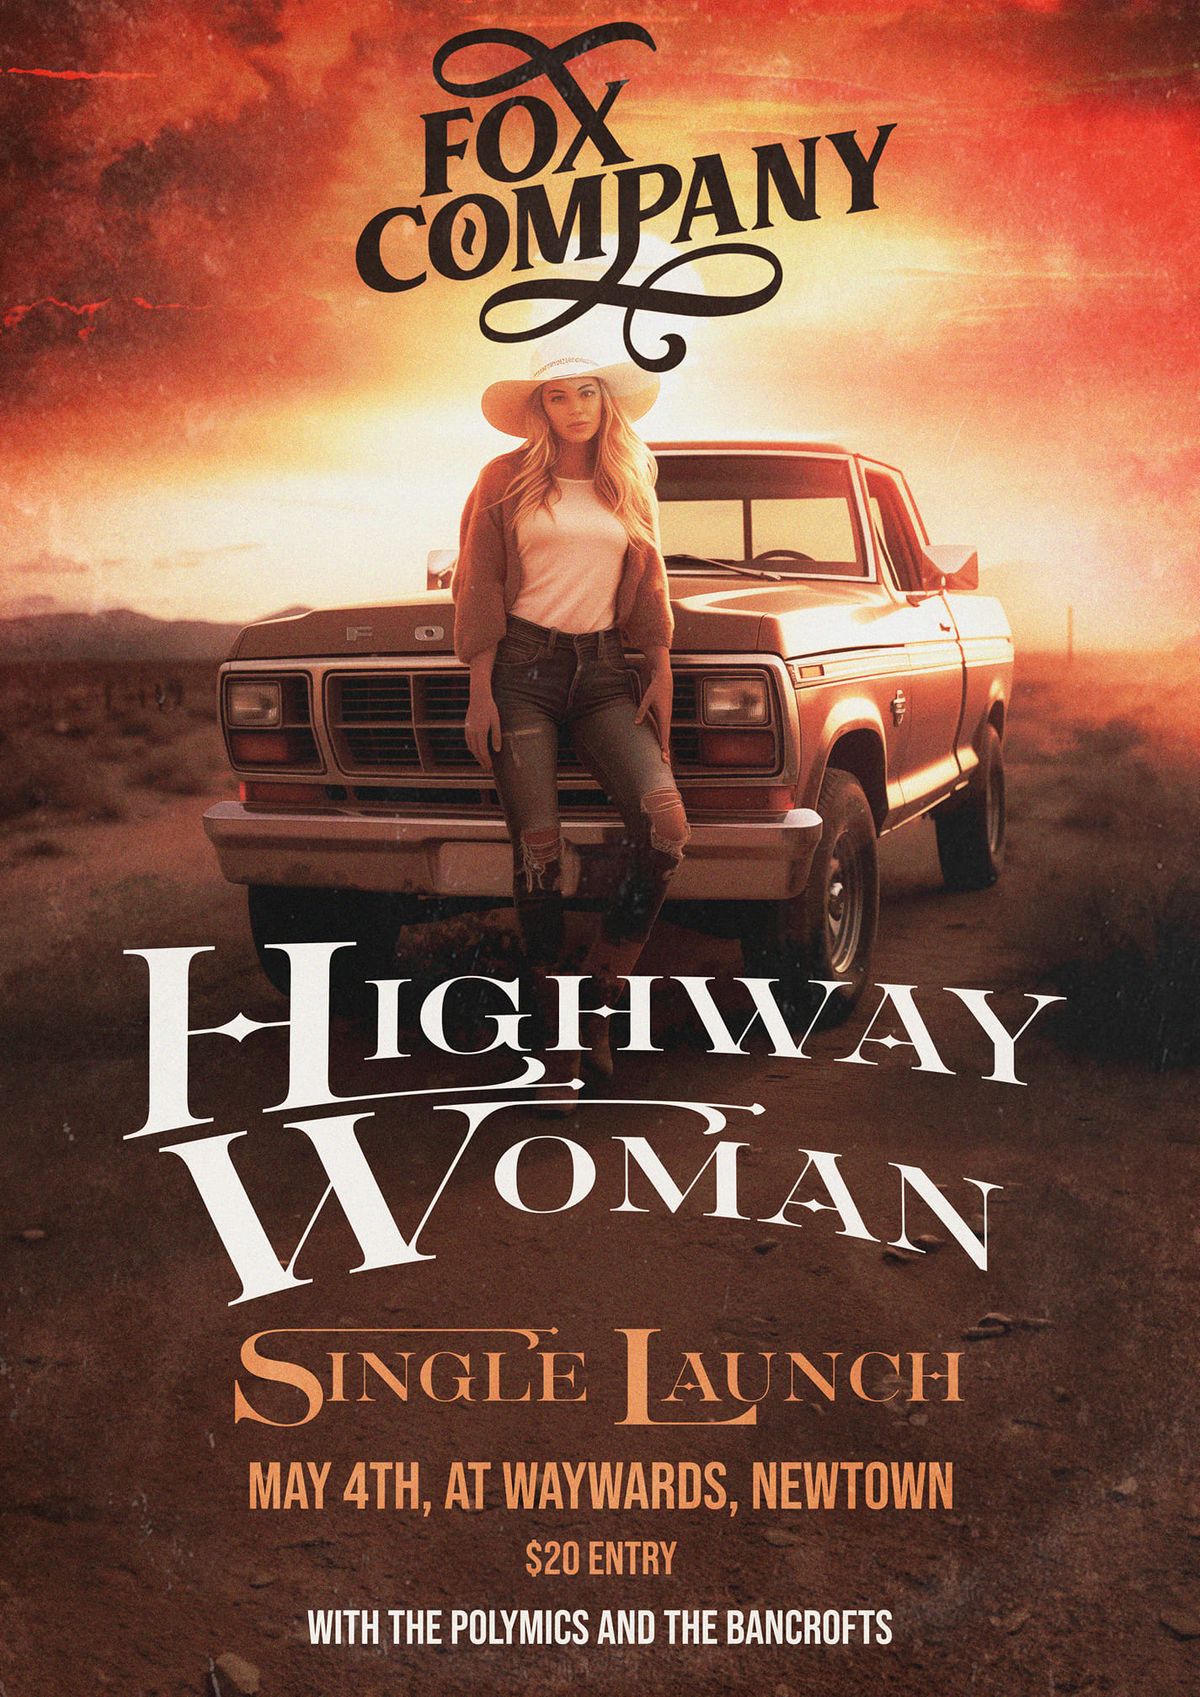 Fox Company " Highway Woman" Single Launch Ft. The Polymics and The Bancrofts